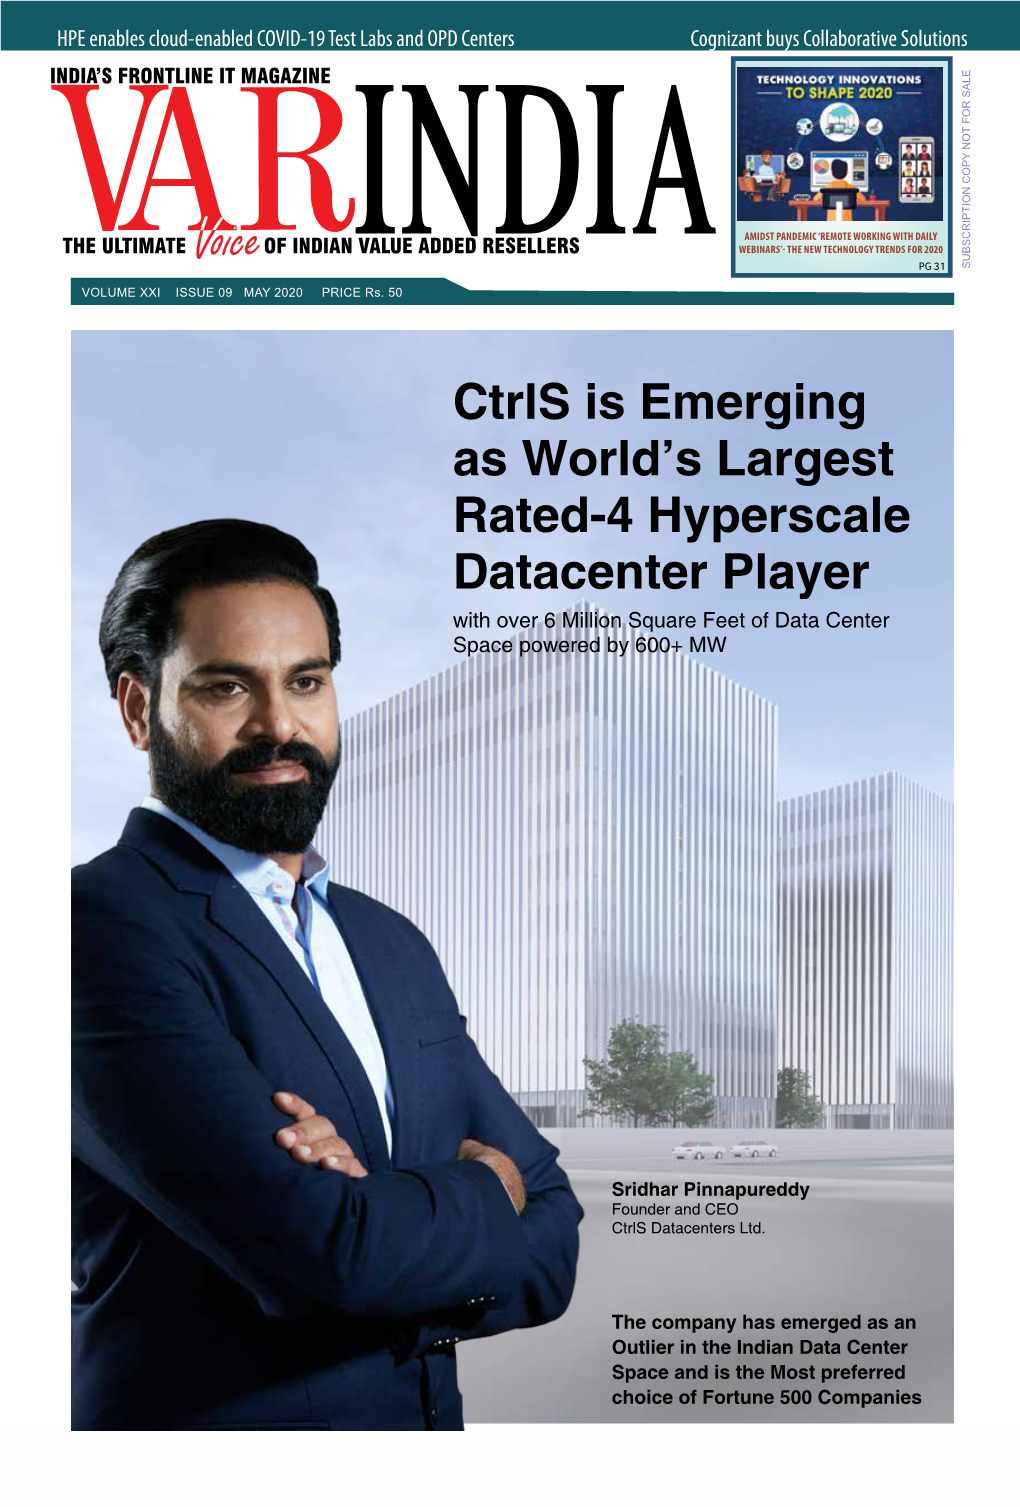 Ctrls Is Emerging As World's Largest Rated-4 Hyperscale Datacenter Player